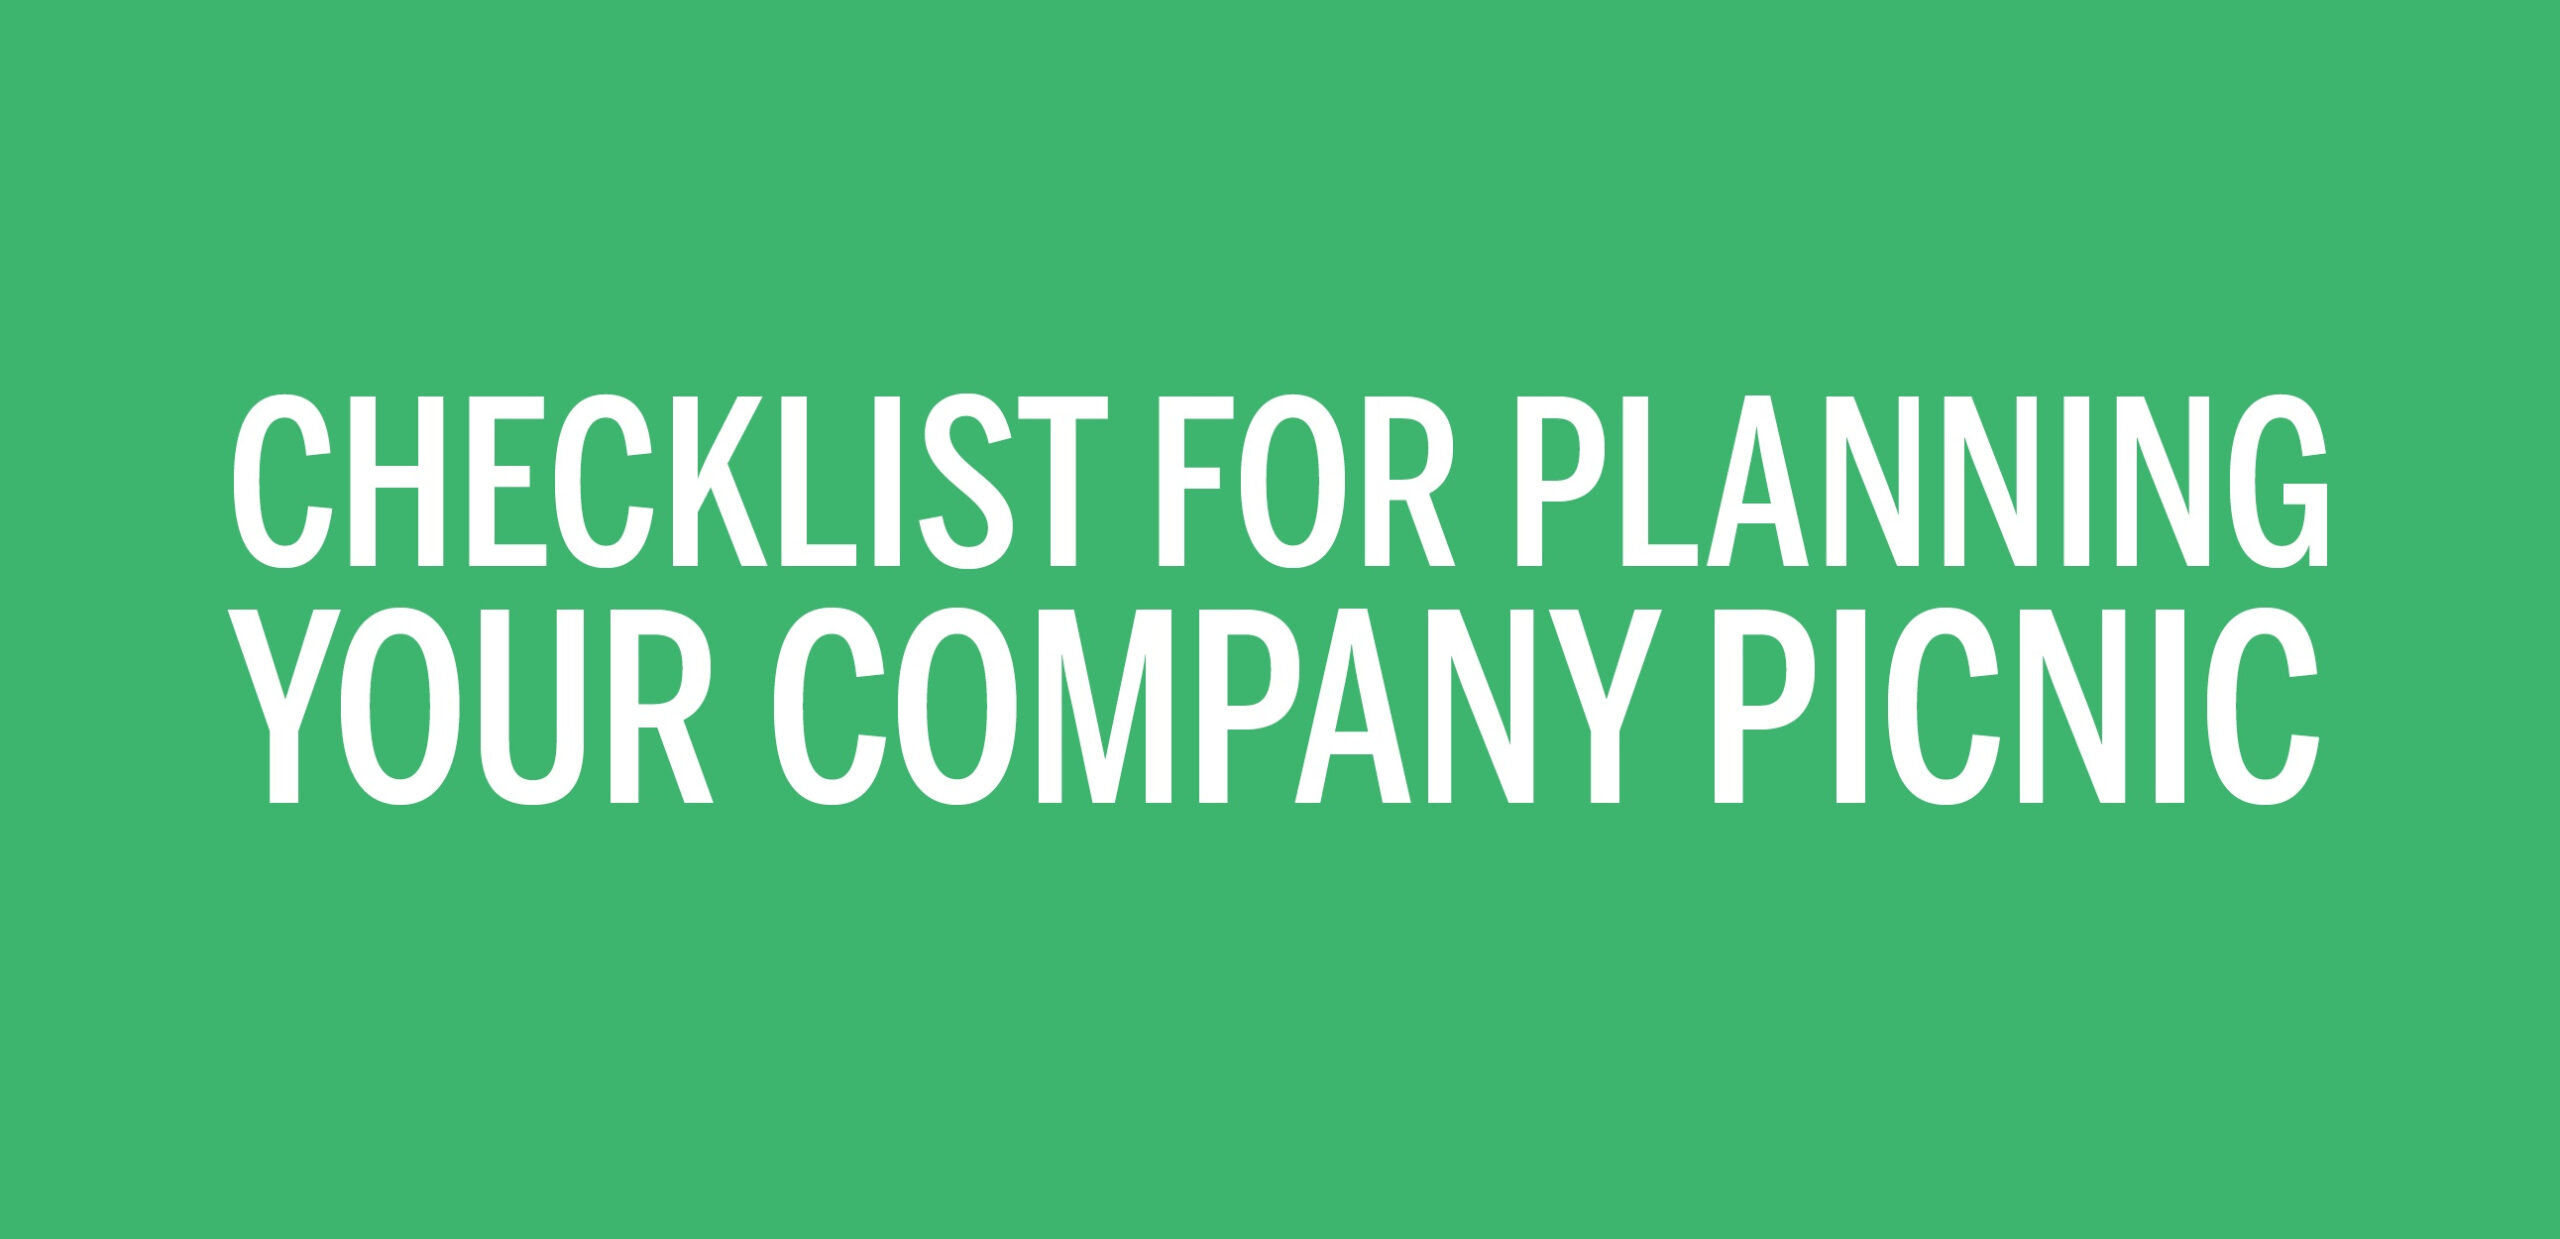 Checklist for Planning Your Company Picnic  Tasty Catering With Regard To Company Picnic Checklist Template With Company Picnic Checklist Template